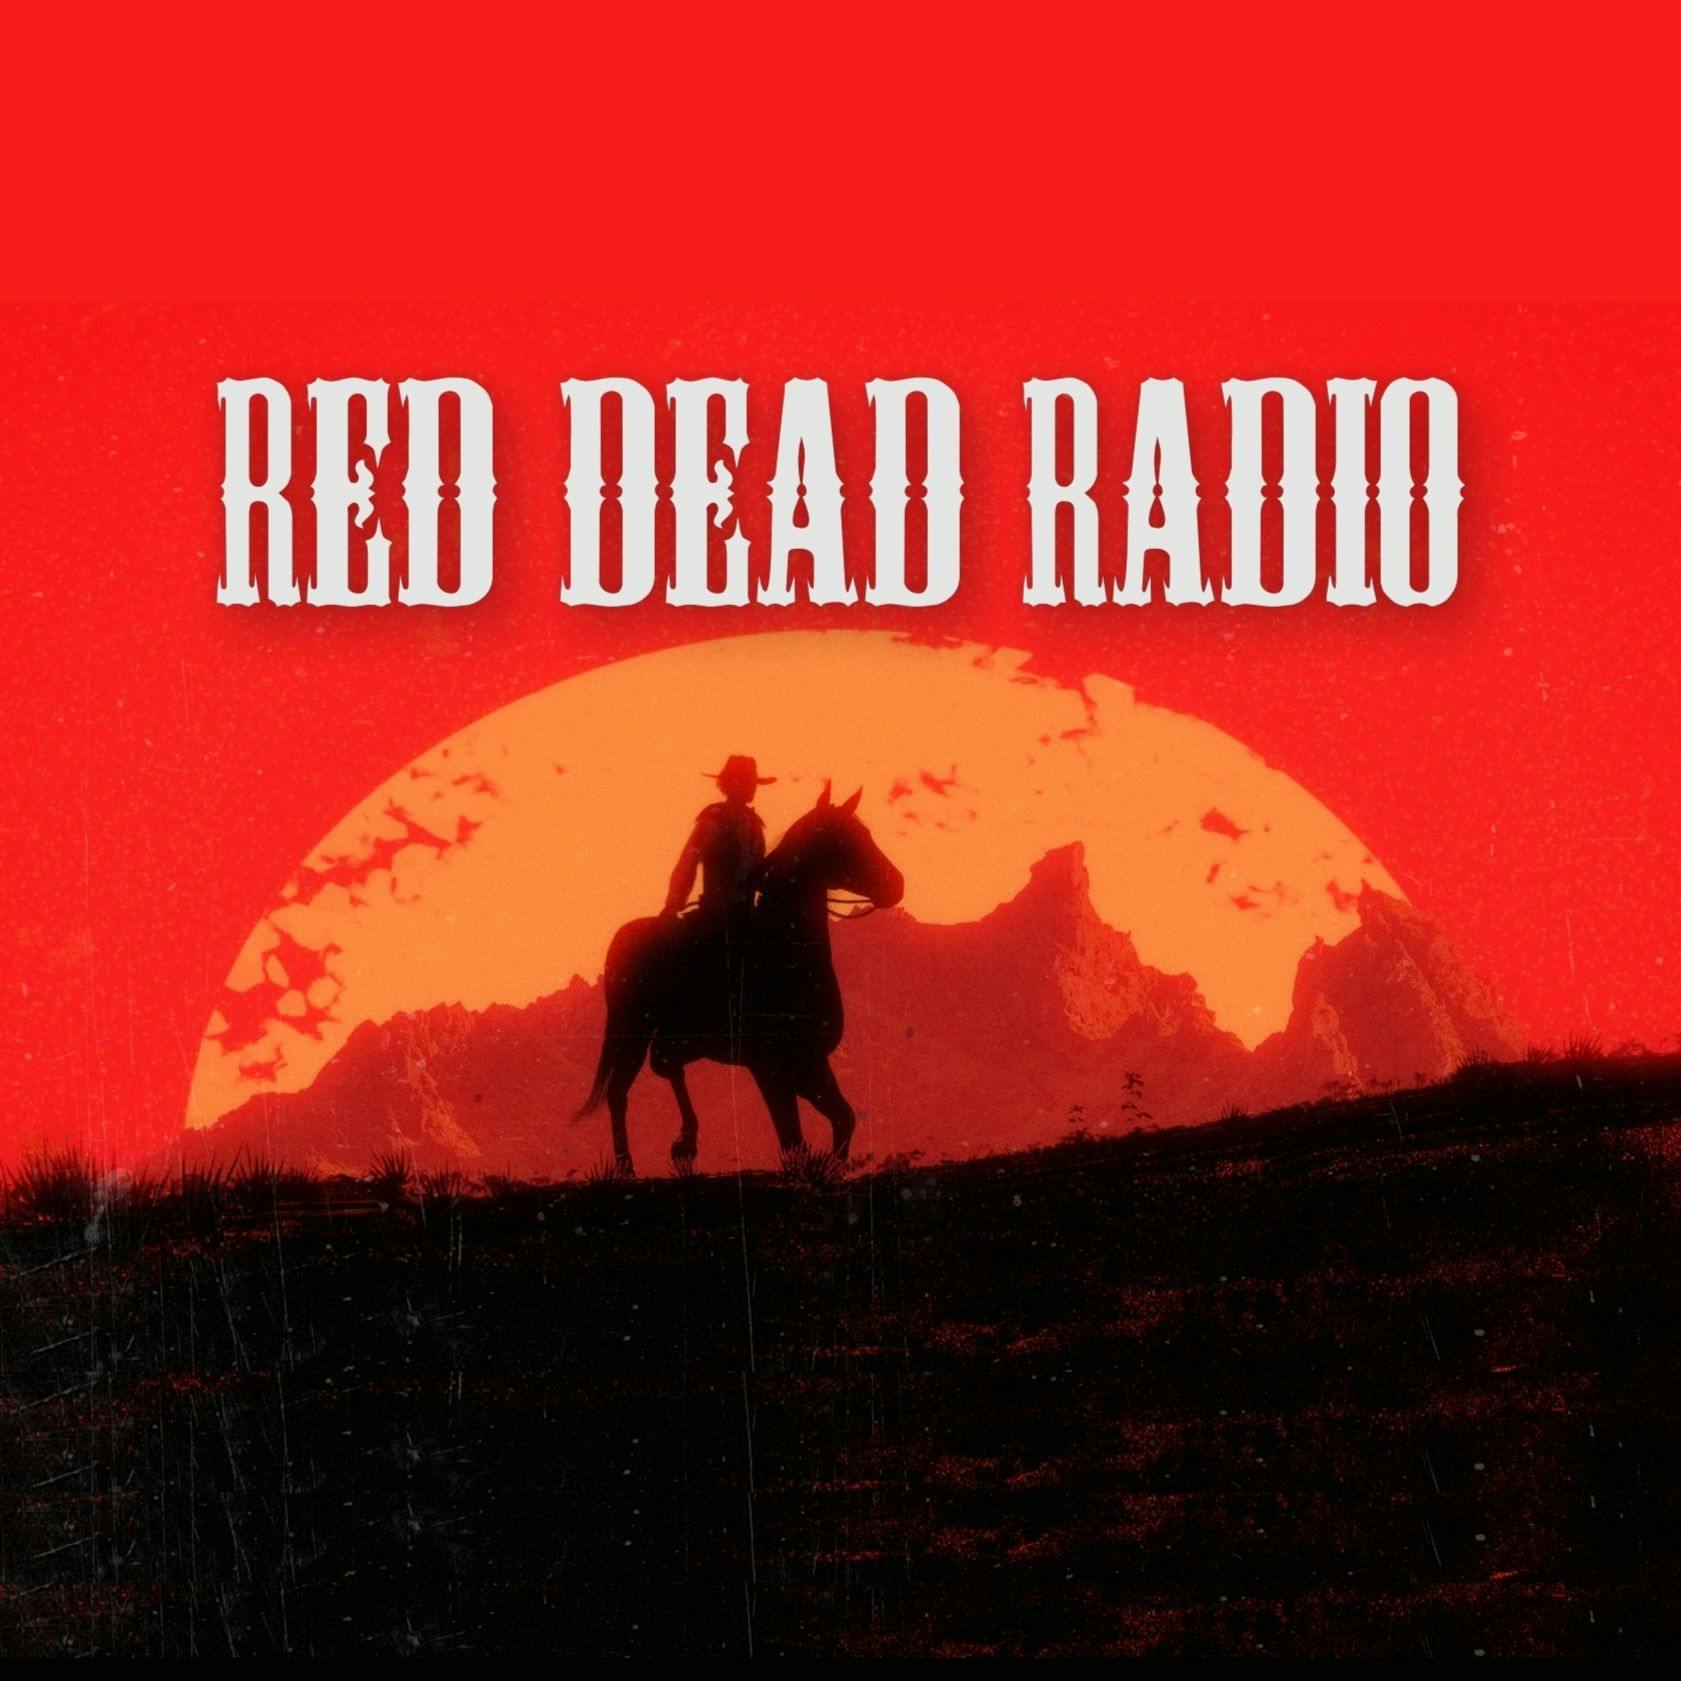 Red Dead Redemption 2 Review Discussion with Greg Miller - No Story Spoilers: Red Dead Radio Ep. 27